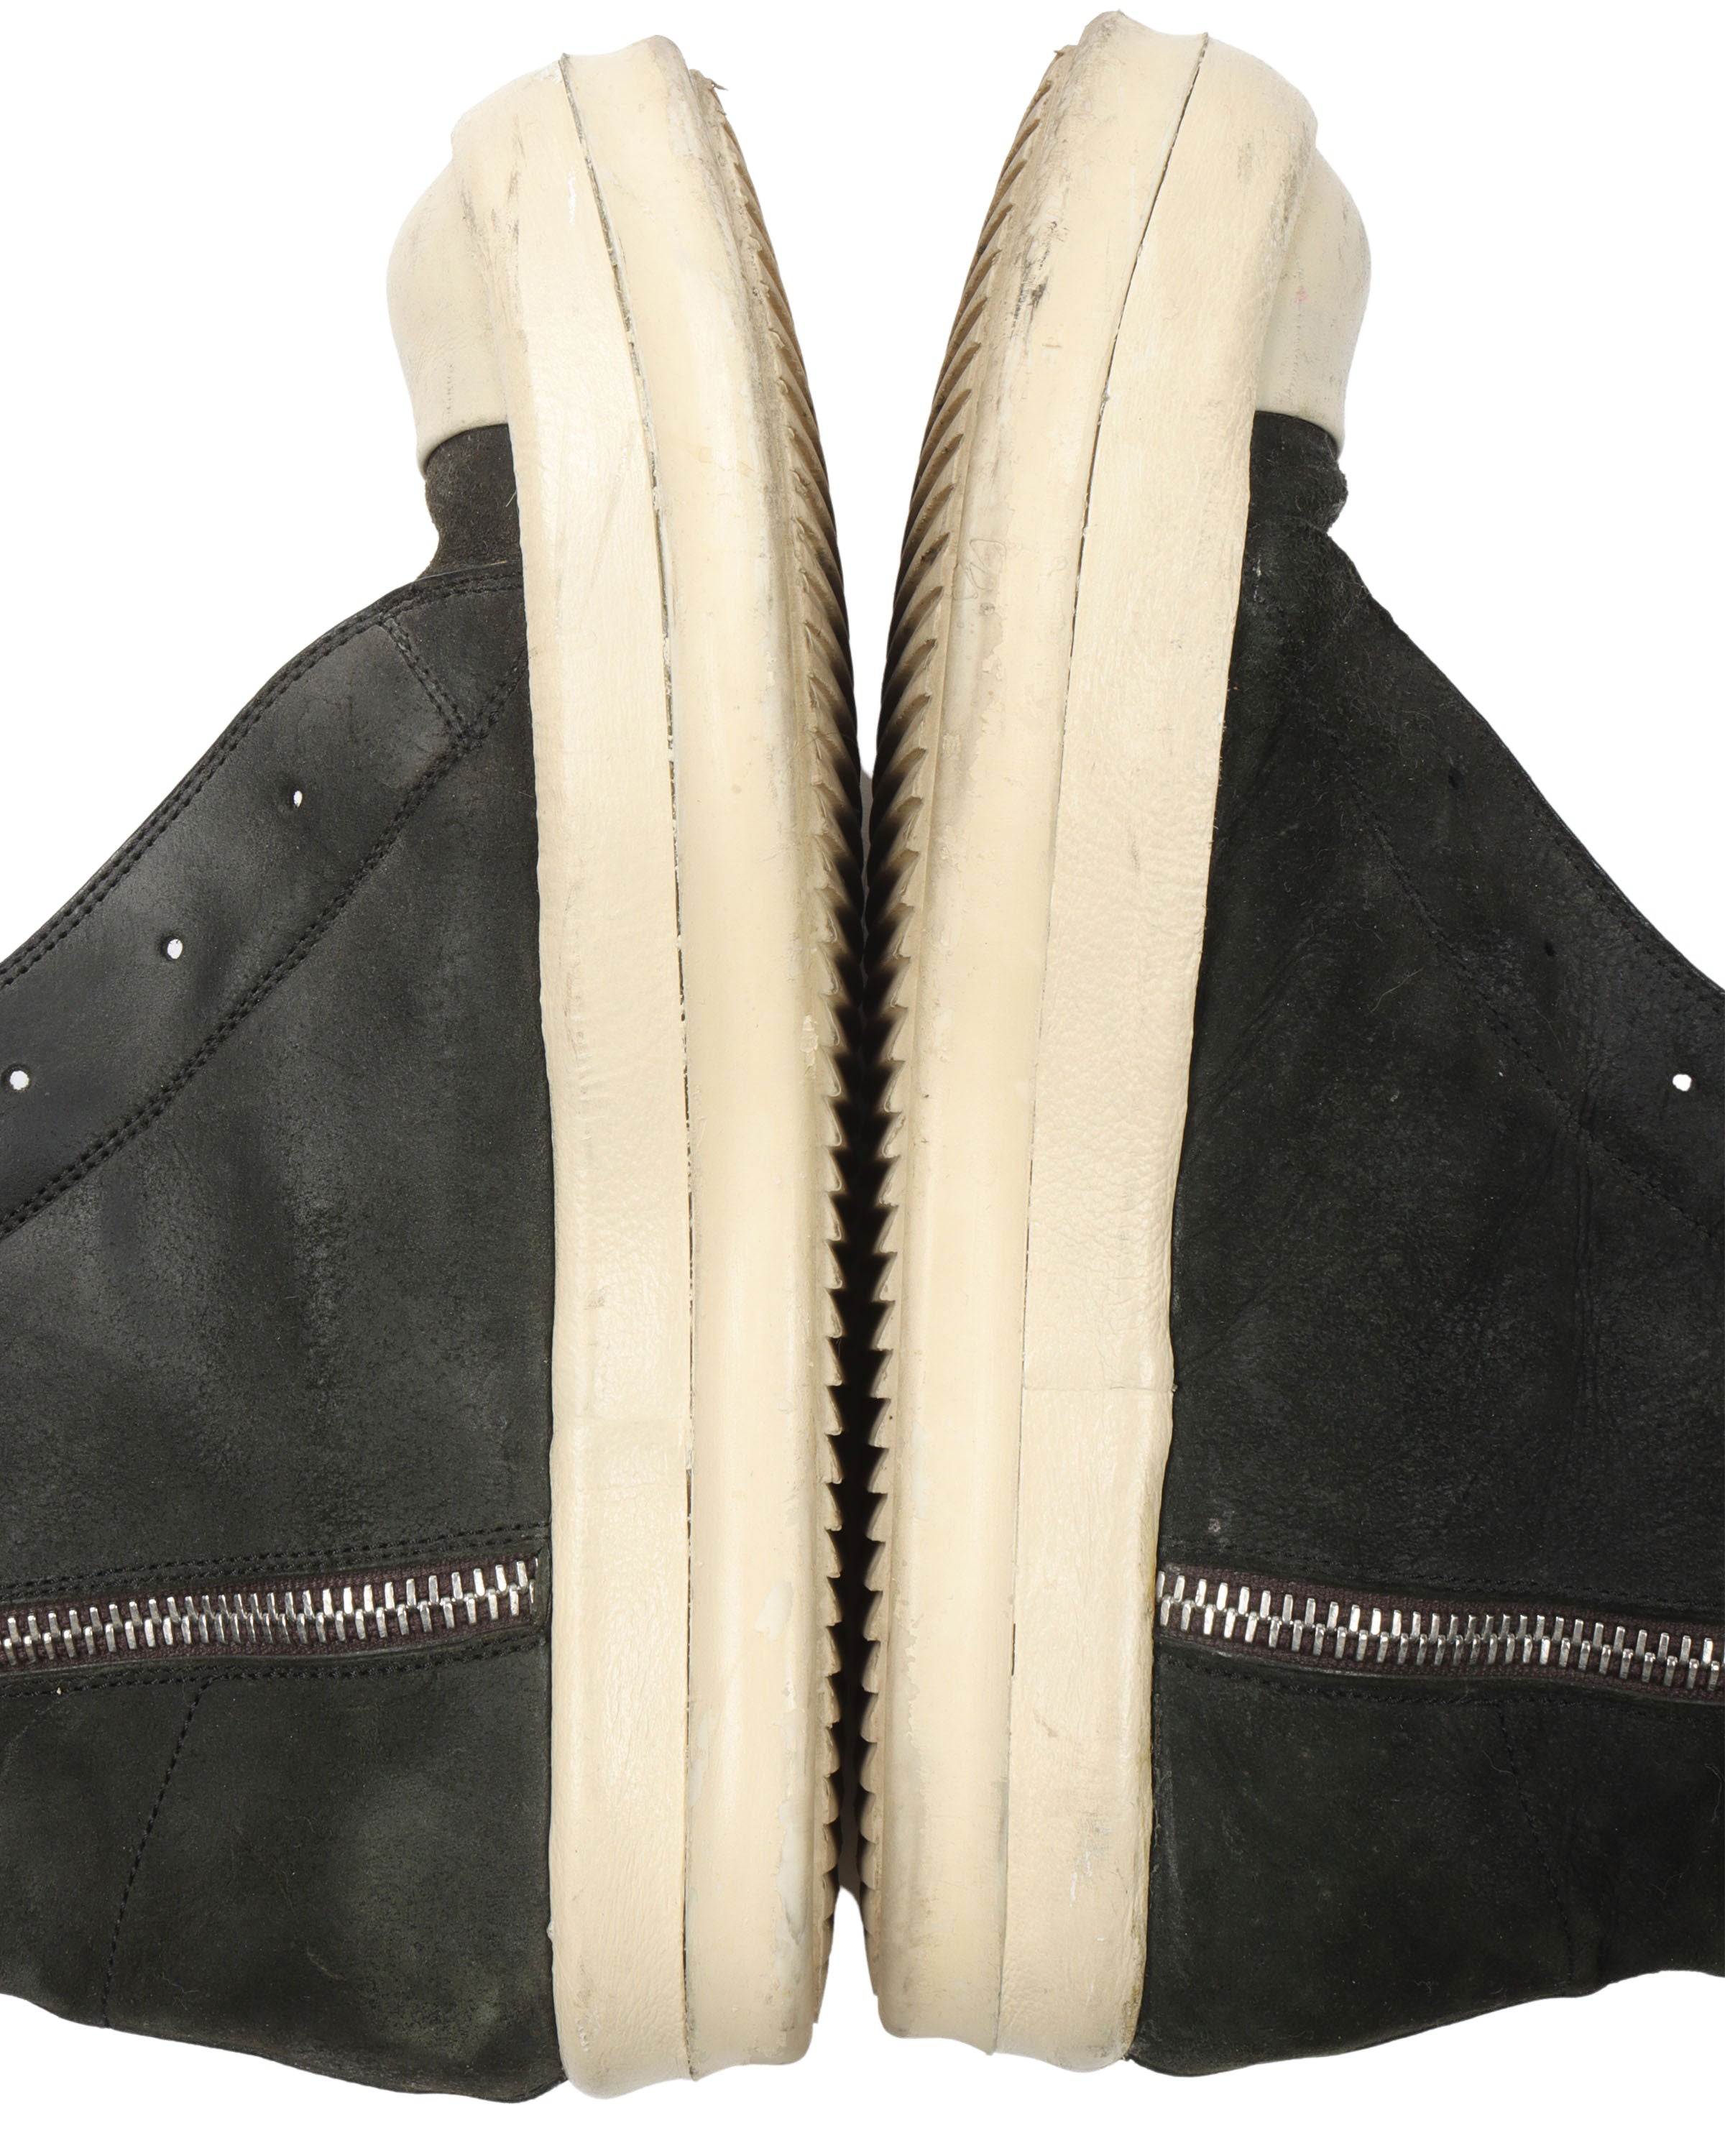 Reverse Leather Laceless Ramone Boots